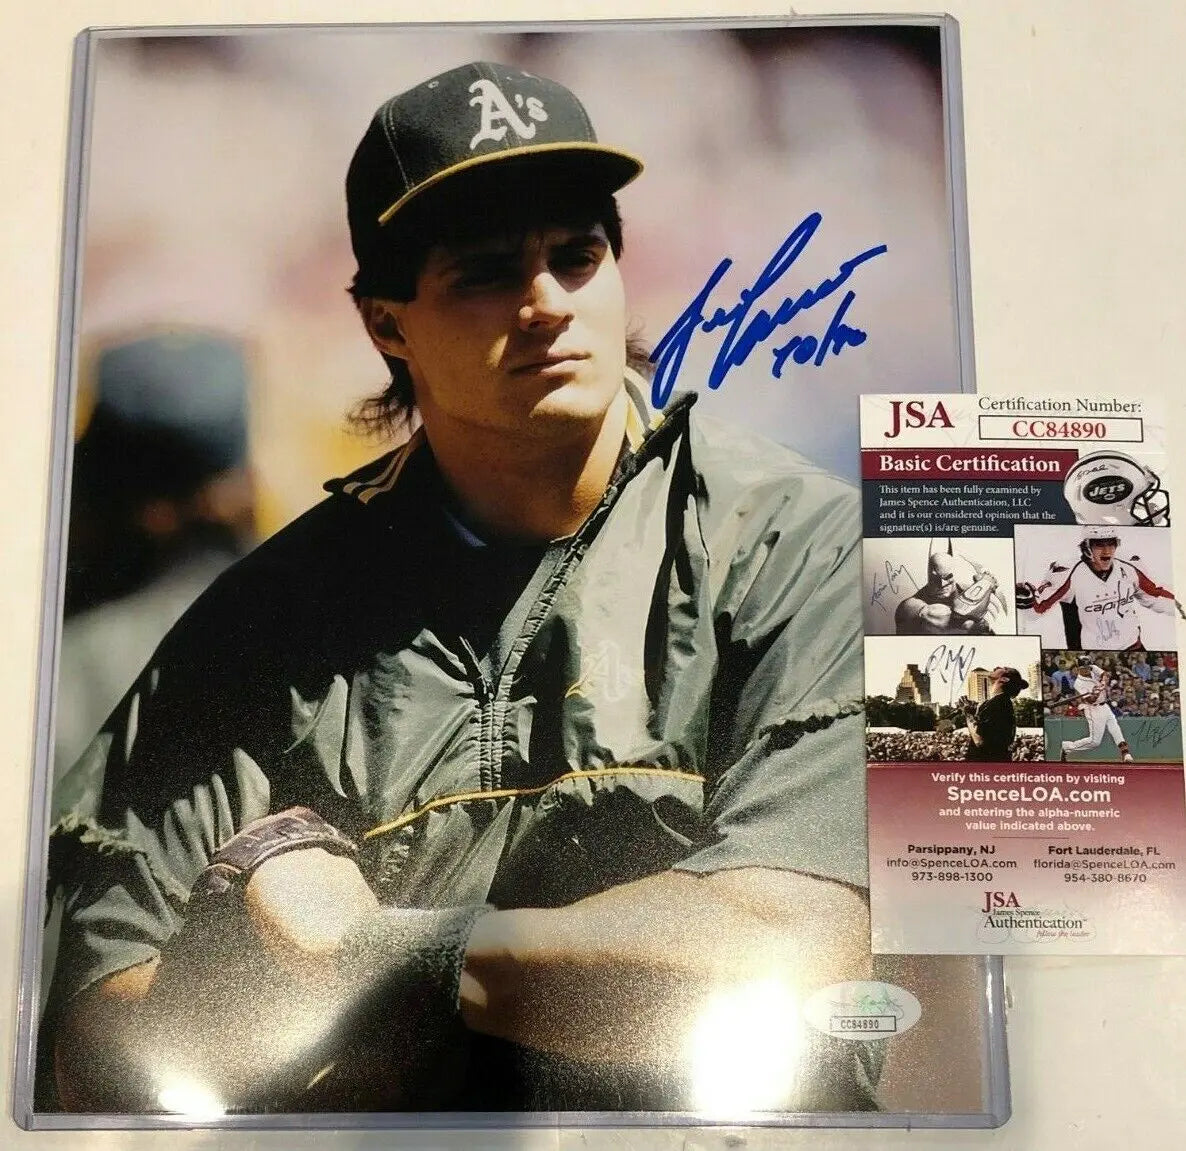 Jose Canseco - Autographed Signed Photograph